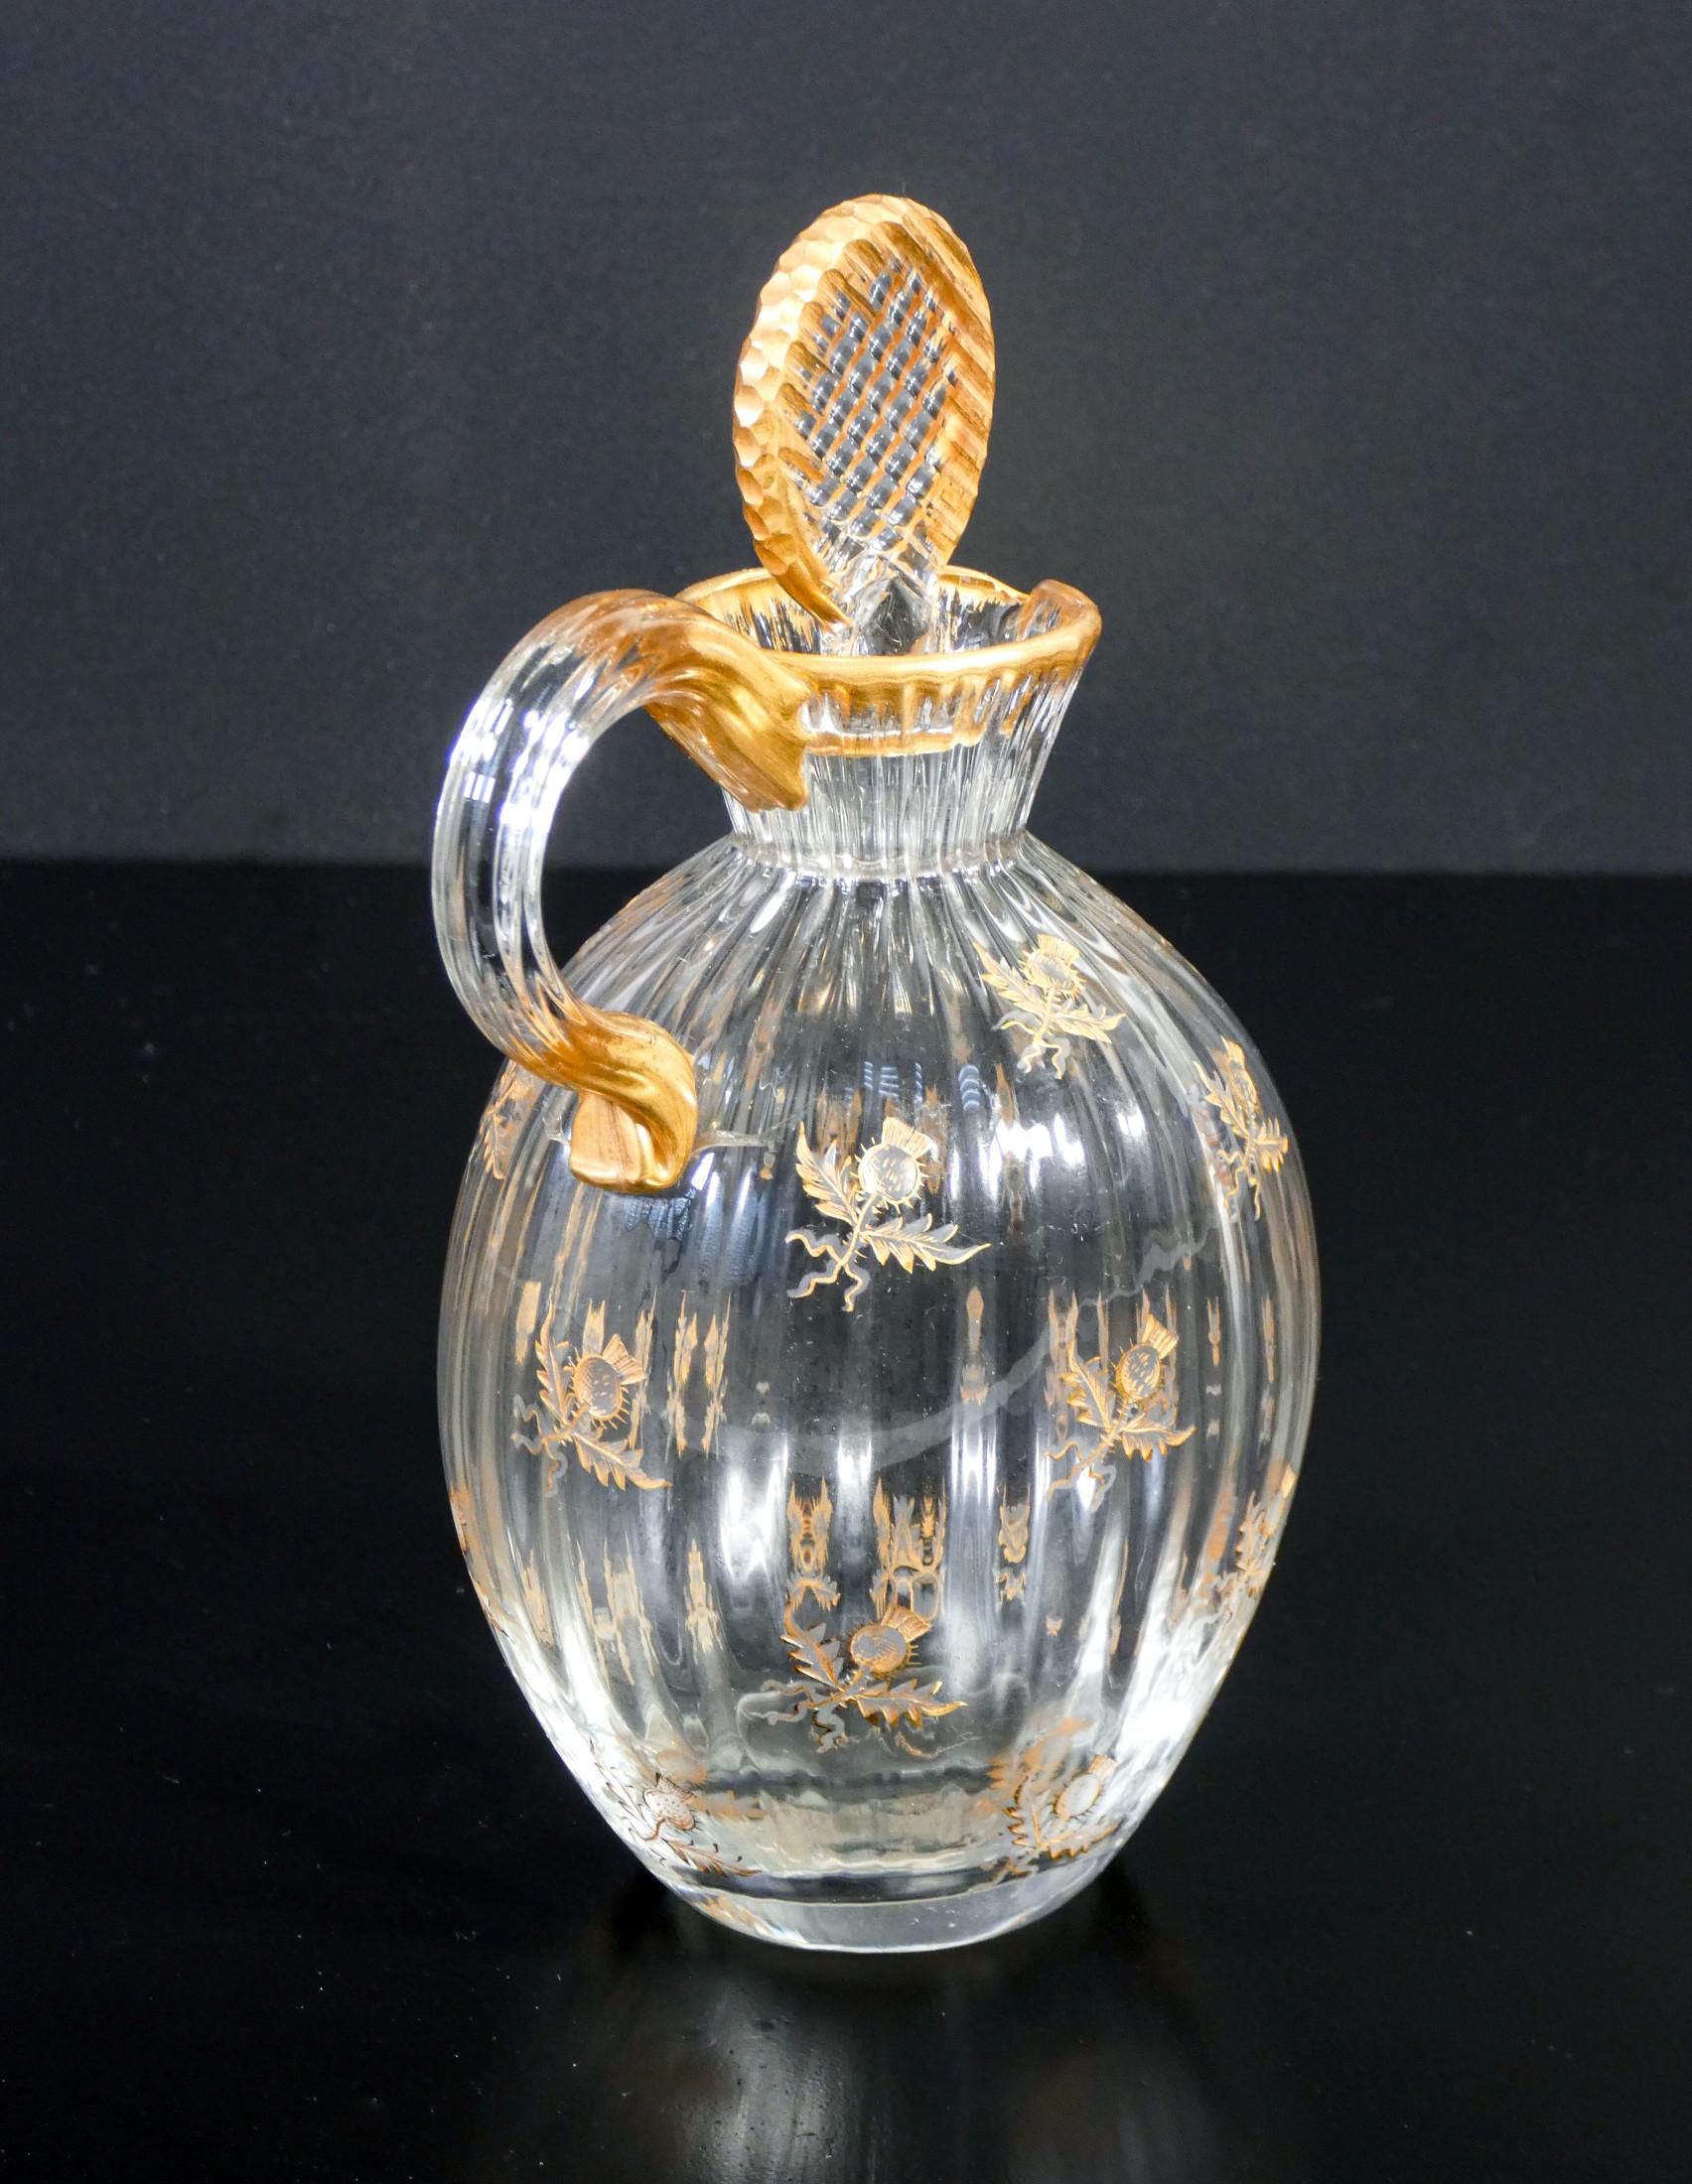 Late 19th Century Blown and Engraved Glass Pourer, Daum Nancy, from the 'Service Ducal', 1891